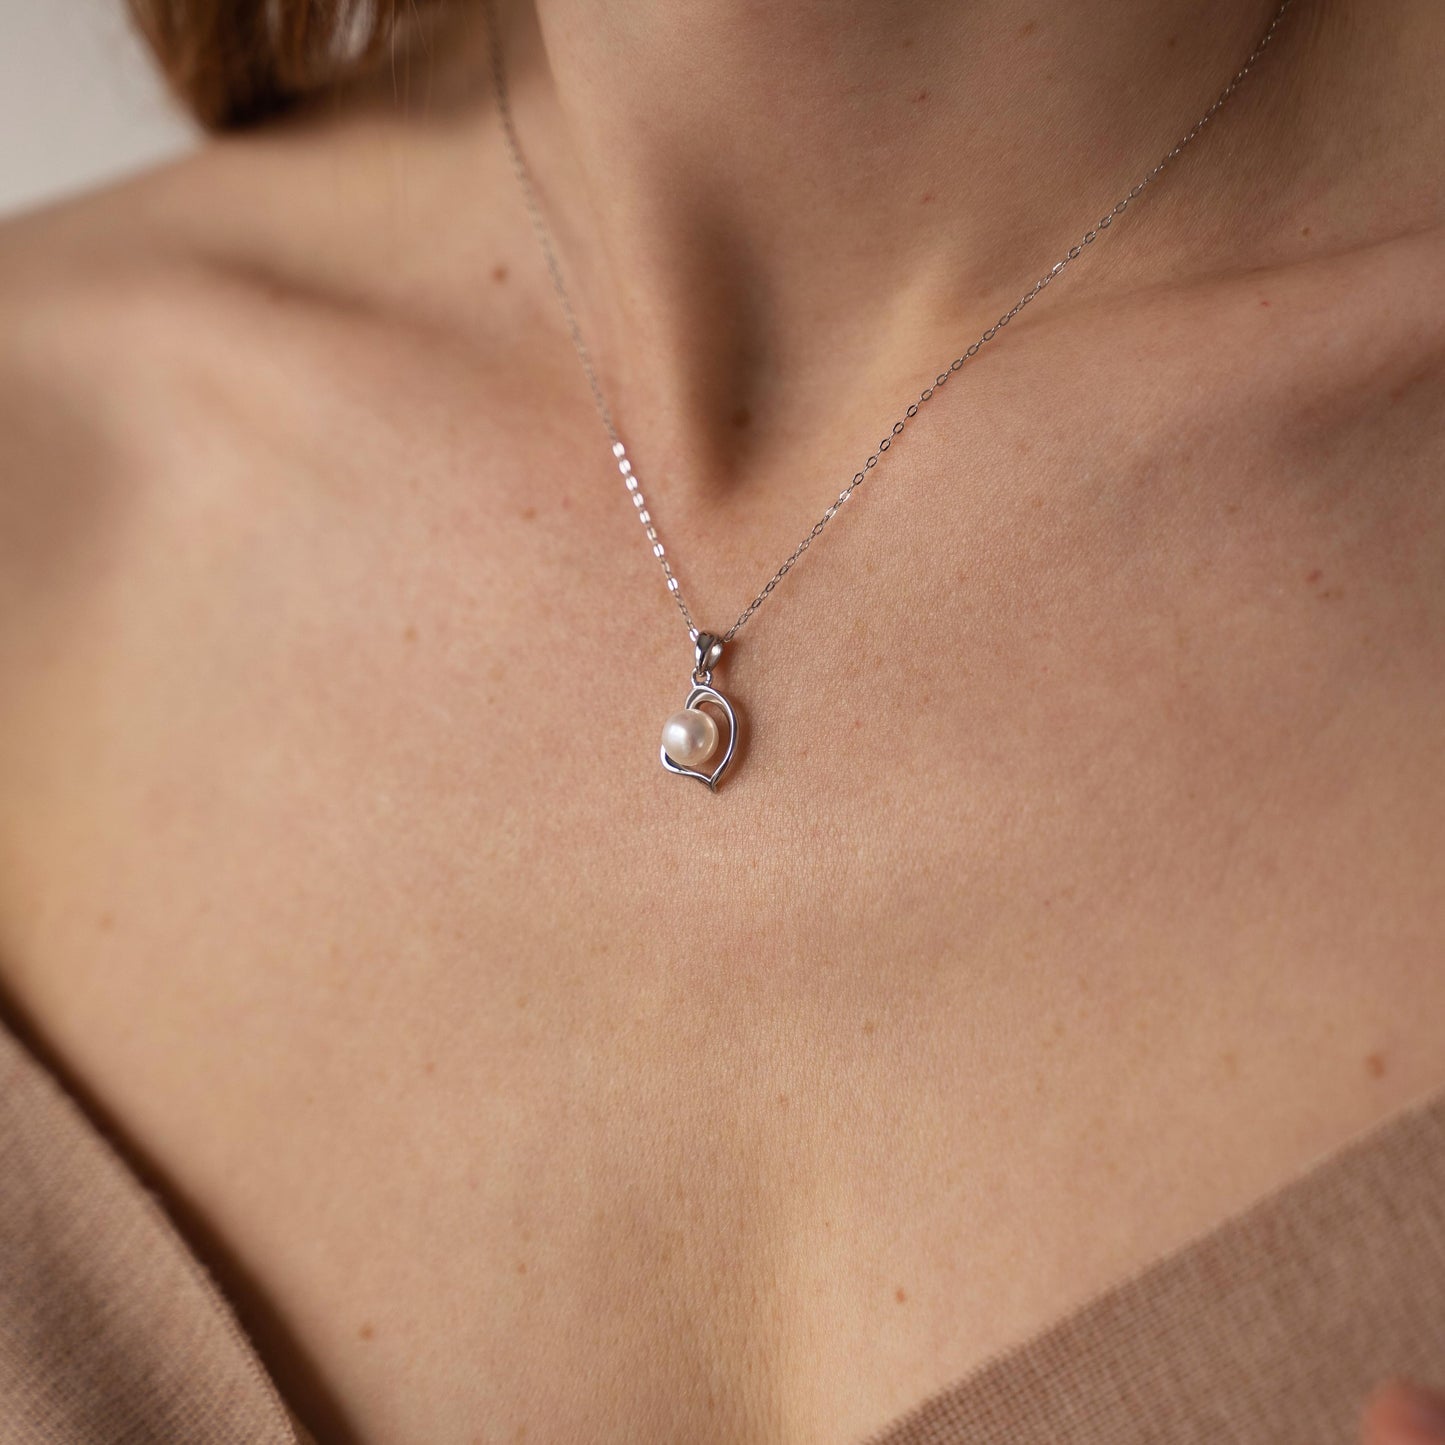 Elegant 925 sterling silver pendant with natural pearl "Love"